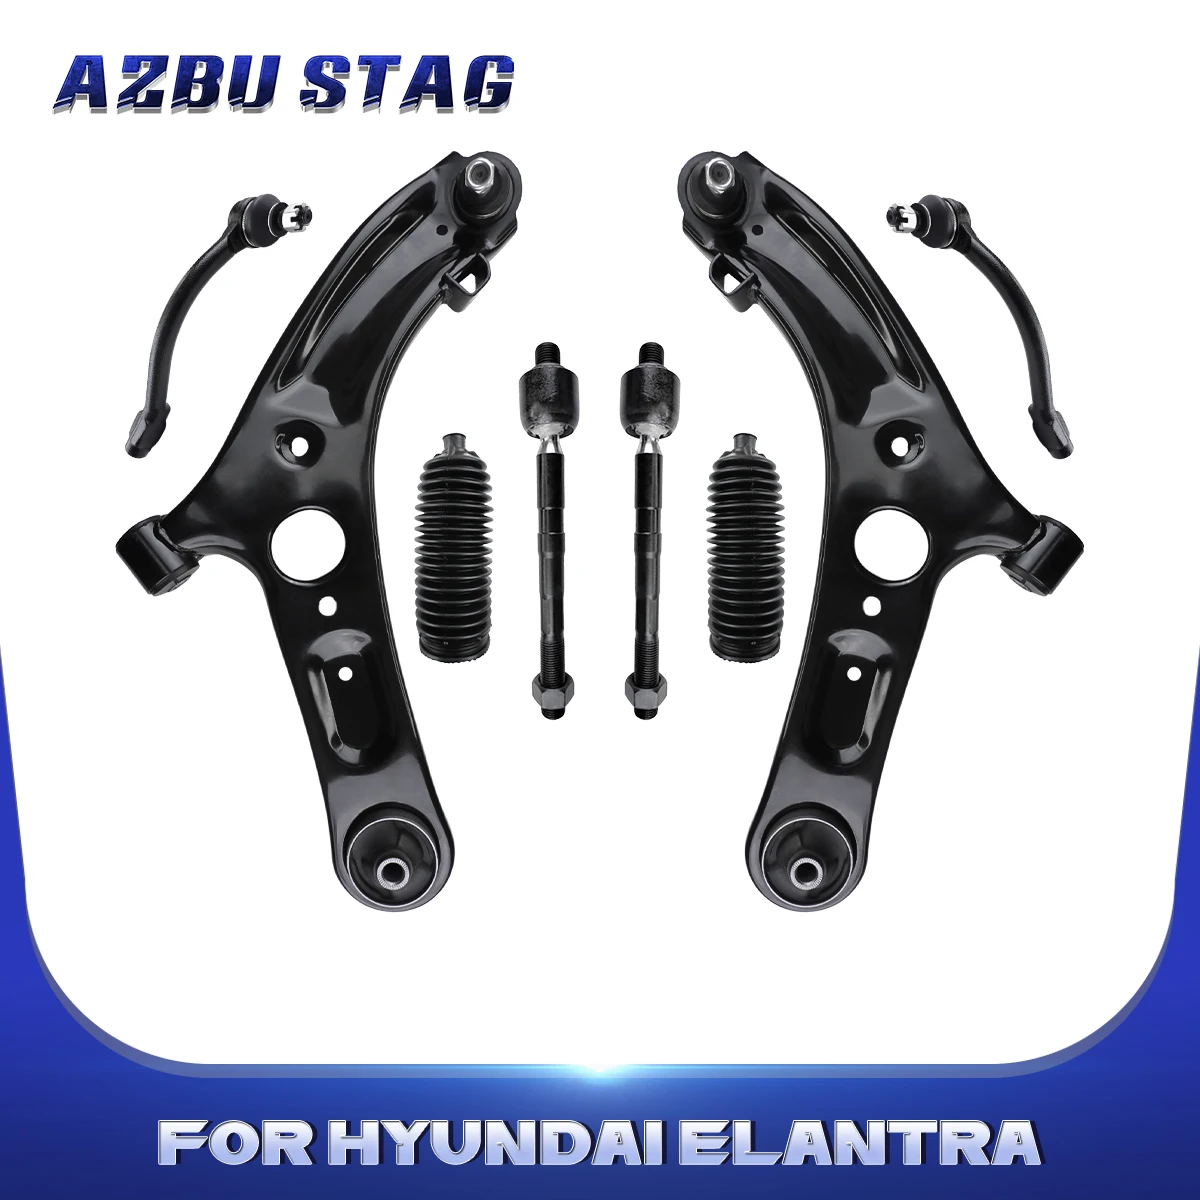 

AzbuStag 8Pcs Front Lower Control Arm Pinion Boot Suspension Kit for HYUNDAI ELANTRA VELOSTER 2011 2012 2013 2014 2015 2016 2017